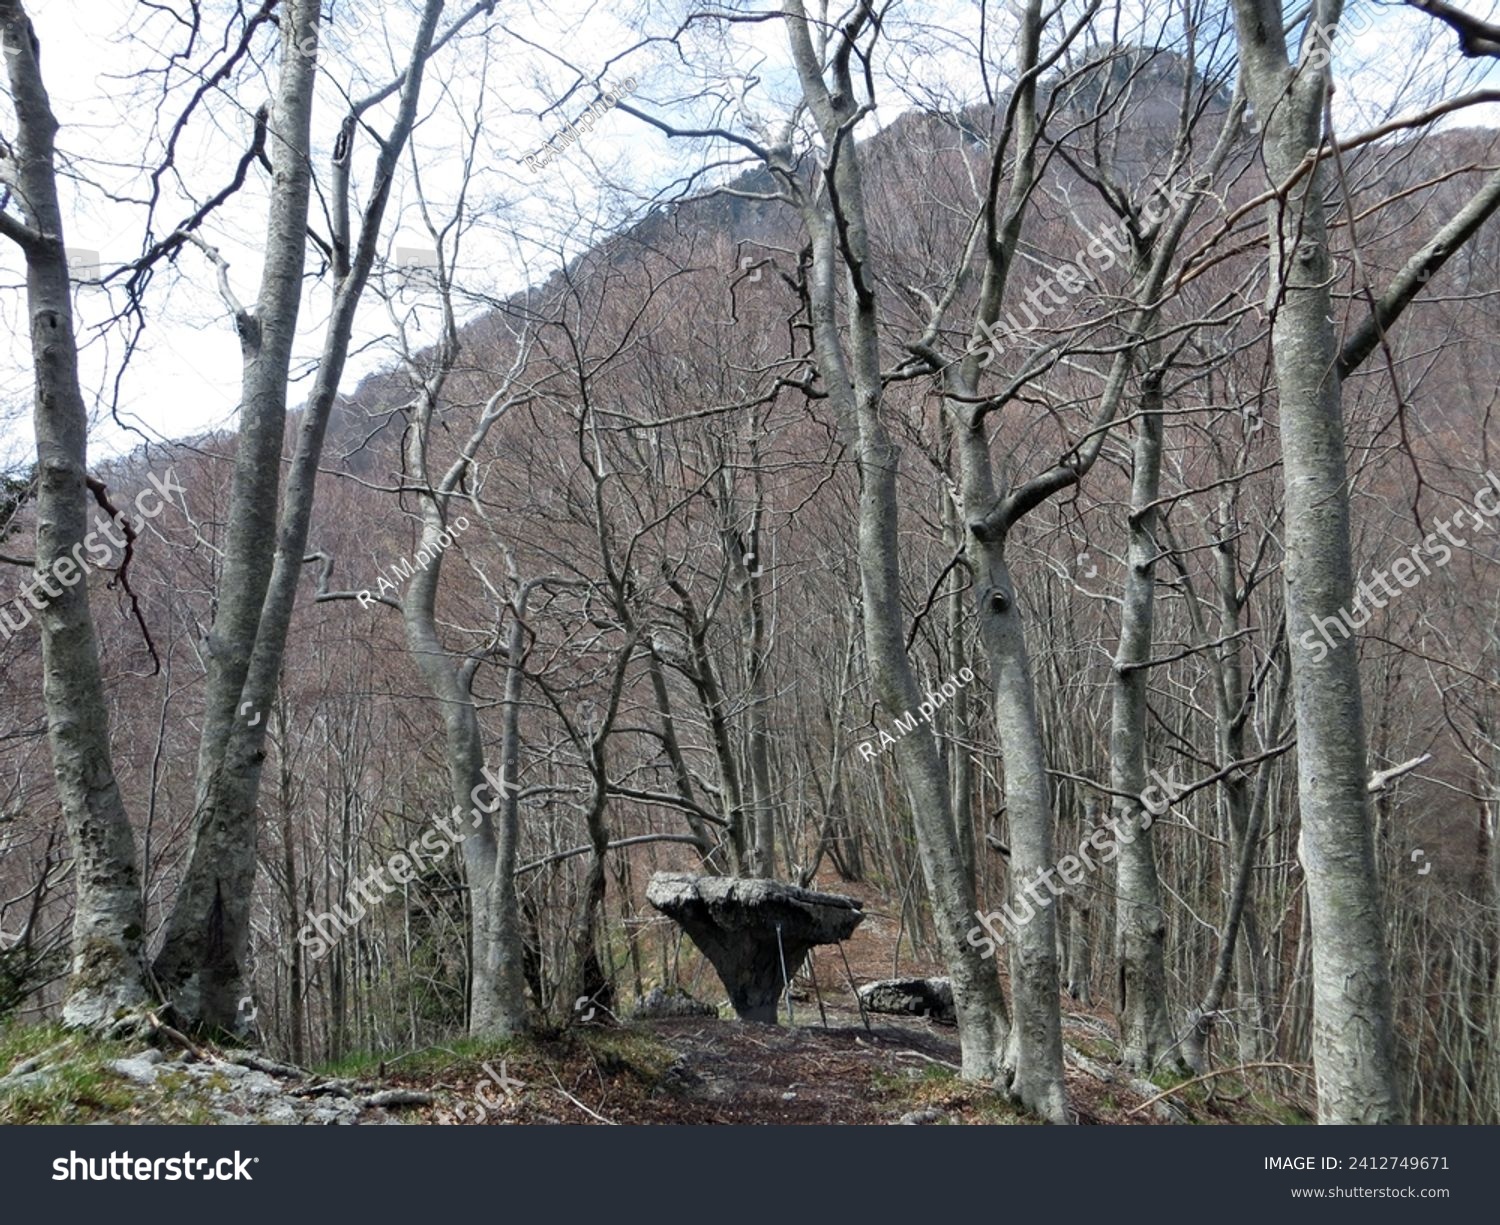 The "Tavola dei Briganti", a spectacular monolith of limestone rock about two meters high, stands at the foot of Montea (1825 m), in the municipality of Sant'Agata d'Esaro, in the Pollino National Par #2412749671